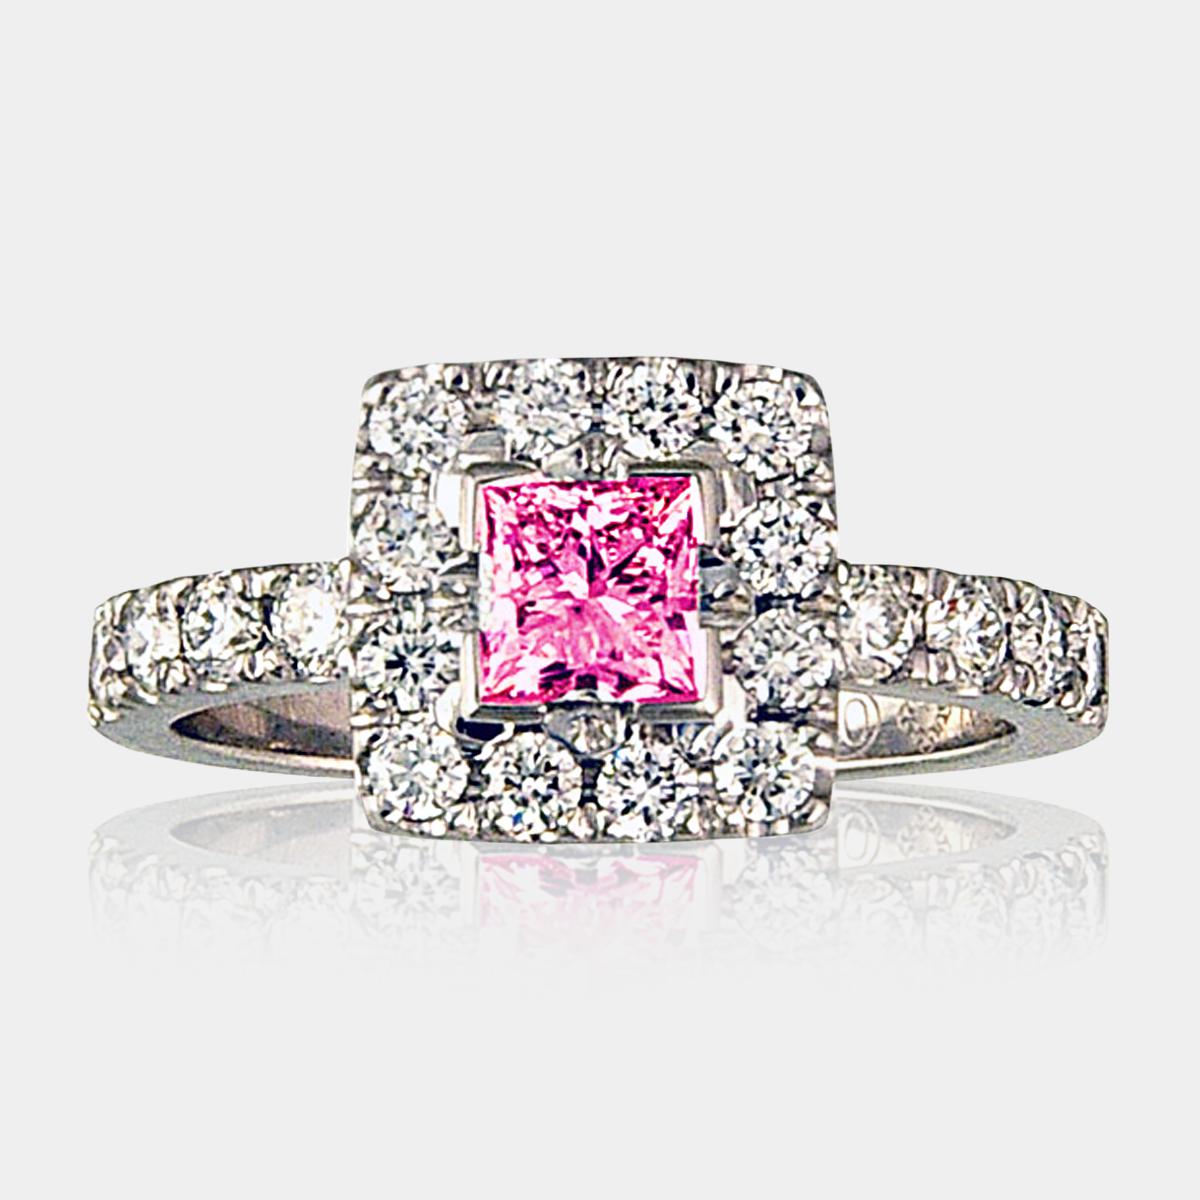 Pink princess cut sapphire engagement ring with round brilliant cut diamond halo and round diamonds in the band.